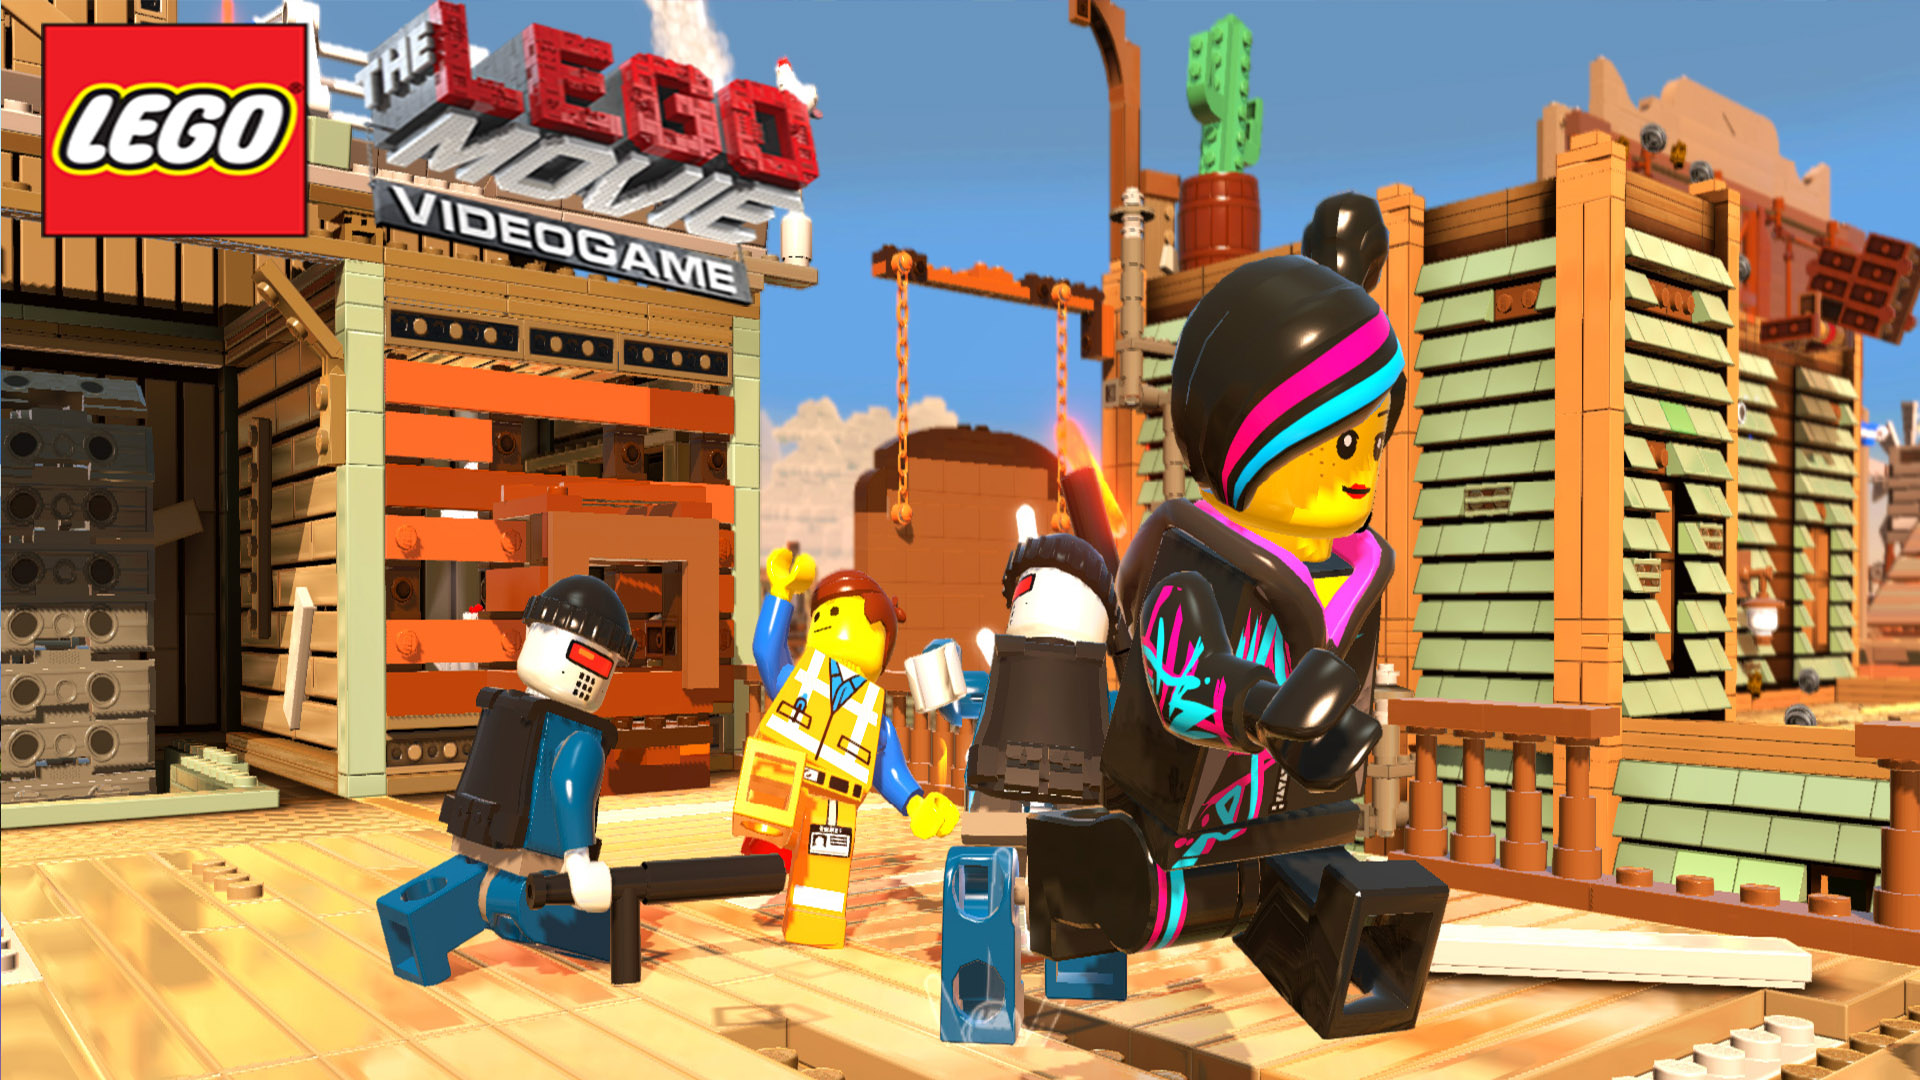 video game, the lego movie videogame, lego